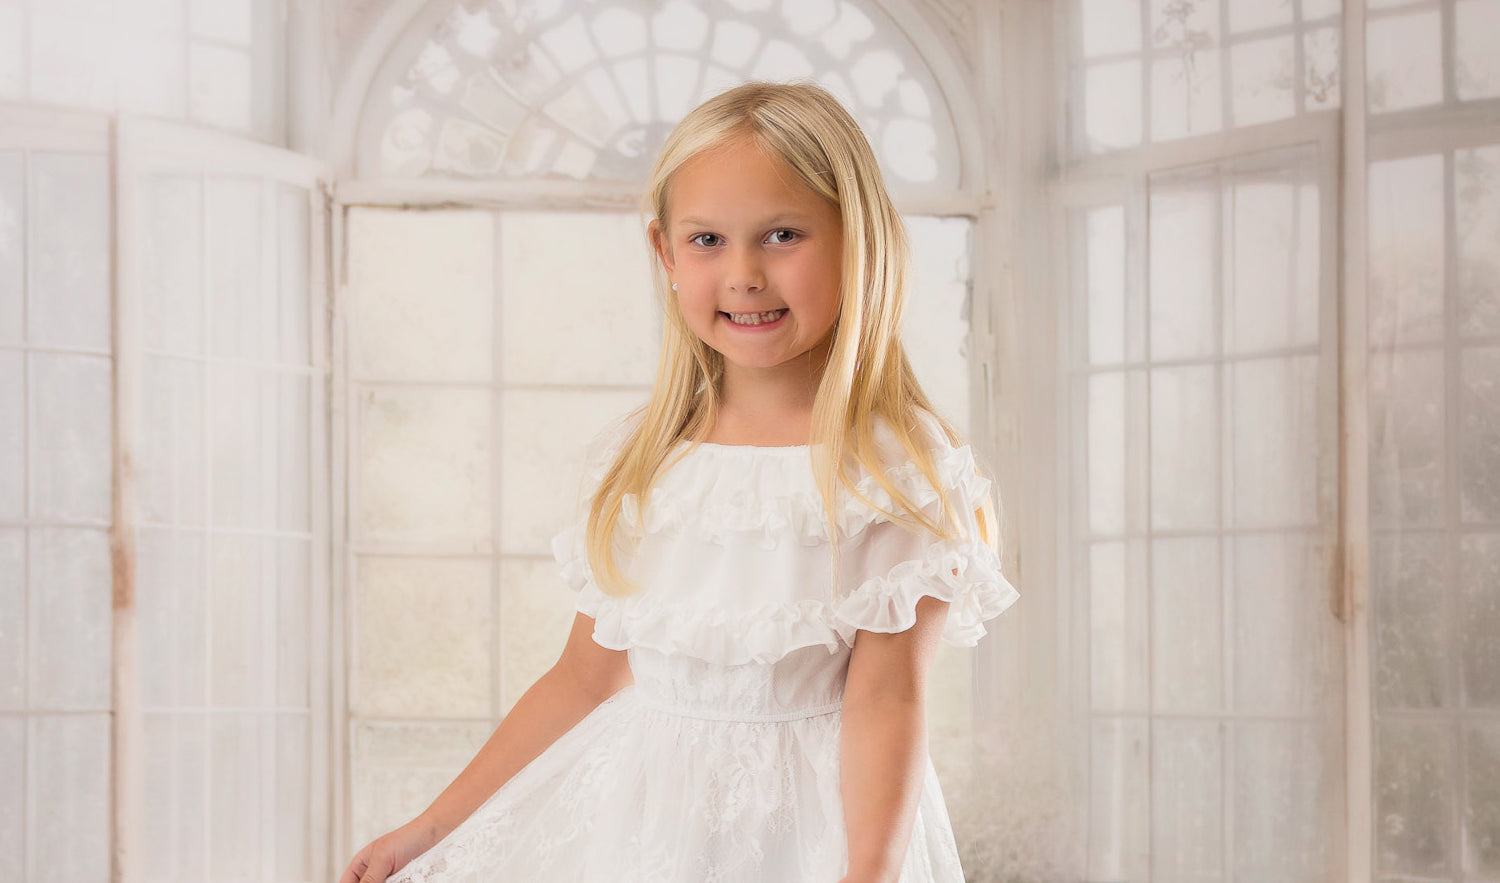 Top Backdrops for Spring Portraits